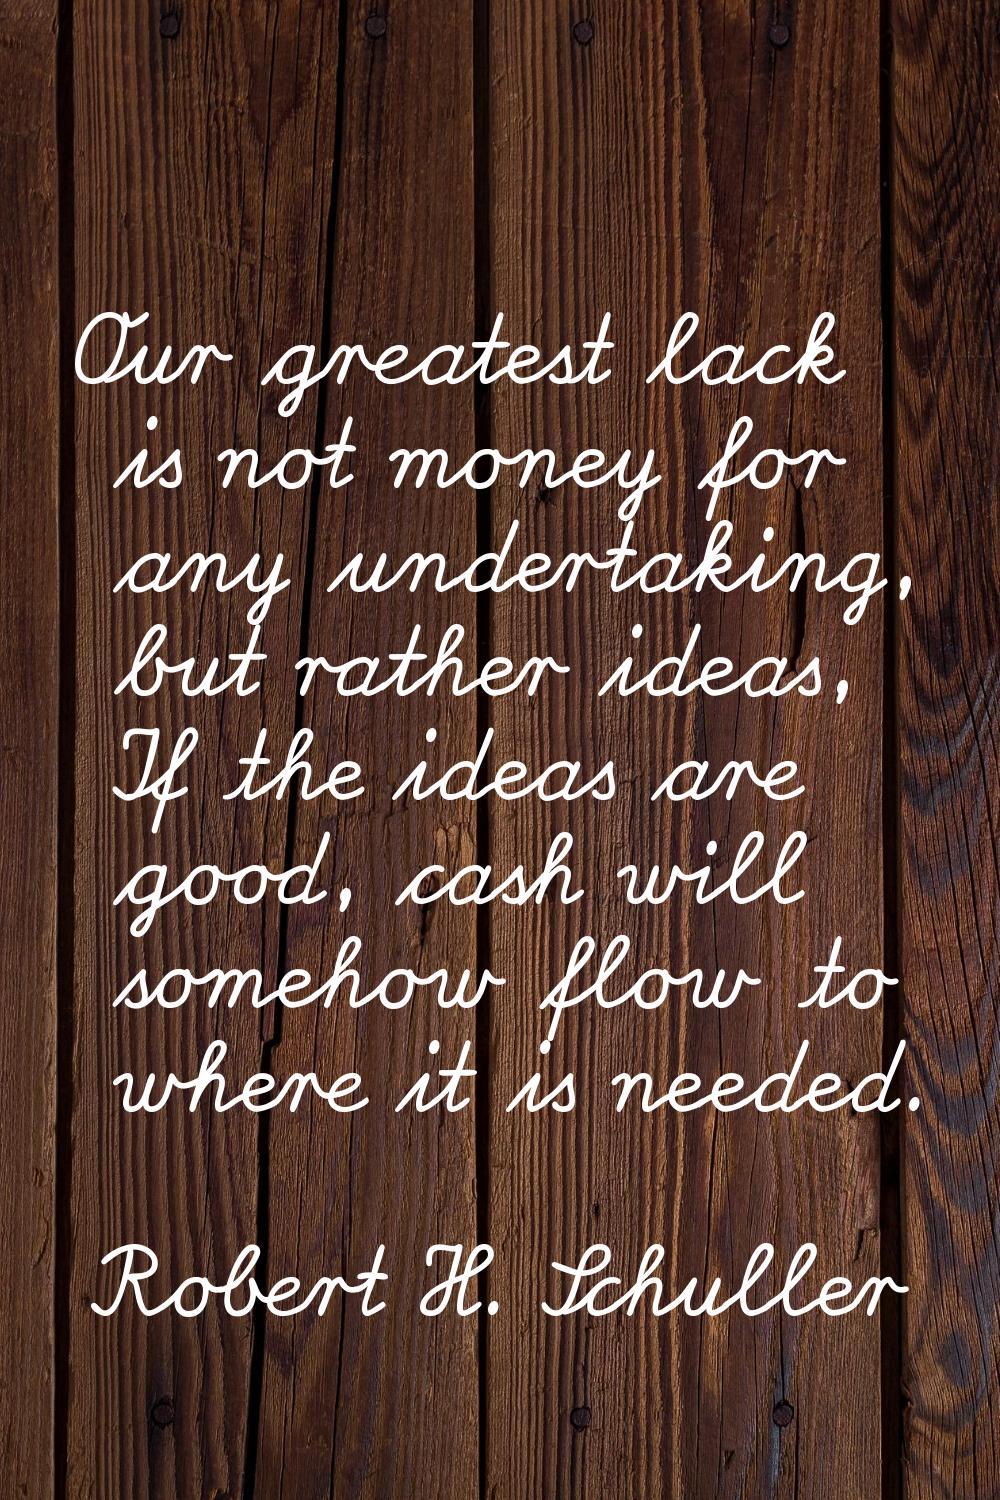 Our greatest lack is not money for any undertaking, but rather ideas, If the ideas are good, cash w